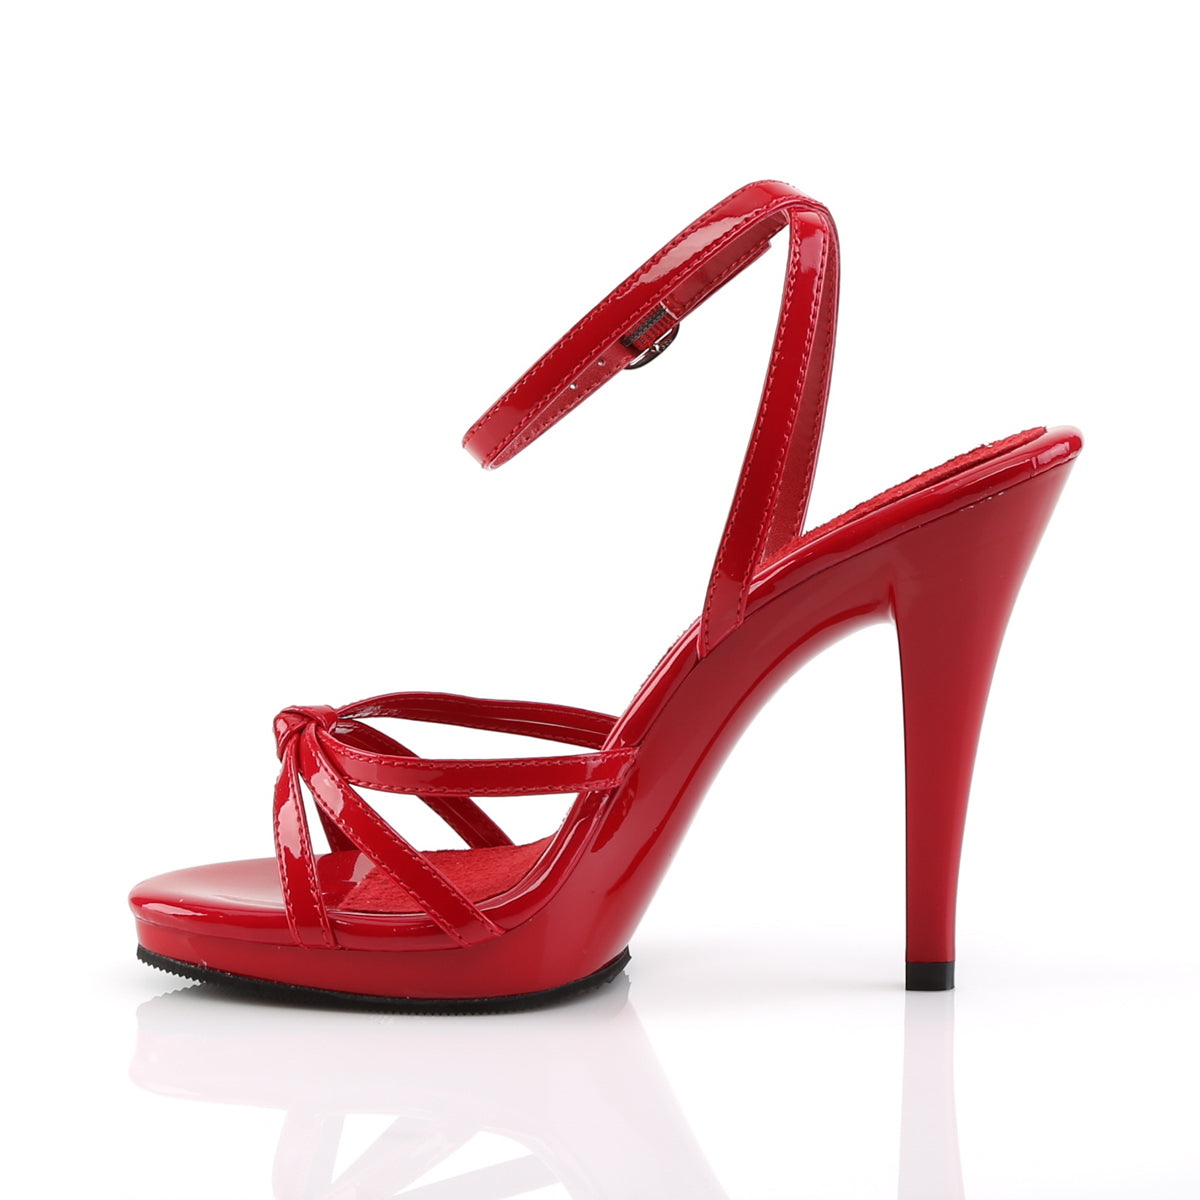 FABULICIOUS FLAIR-436 RED STRAPPY 4.5 INCH HIGH HEEL SHOES SIZE 7